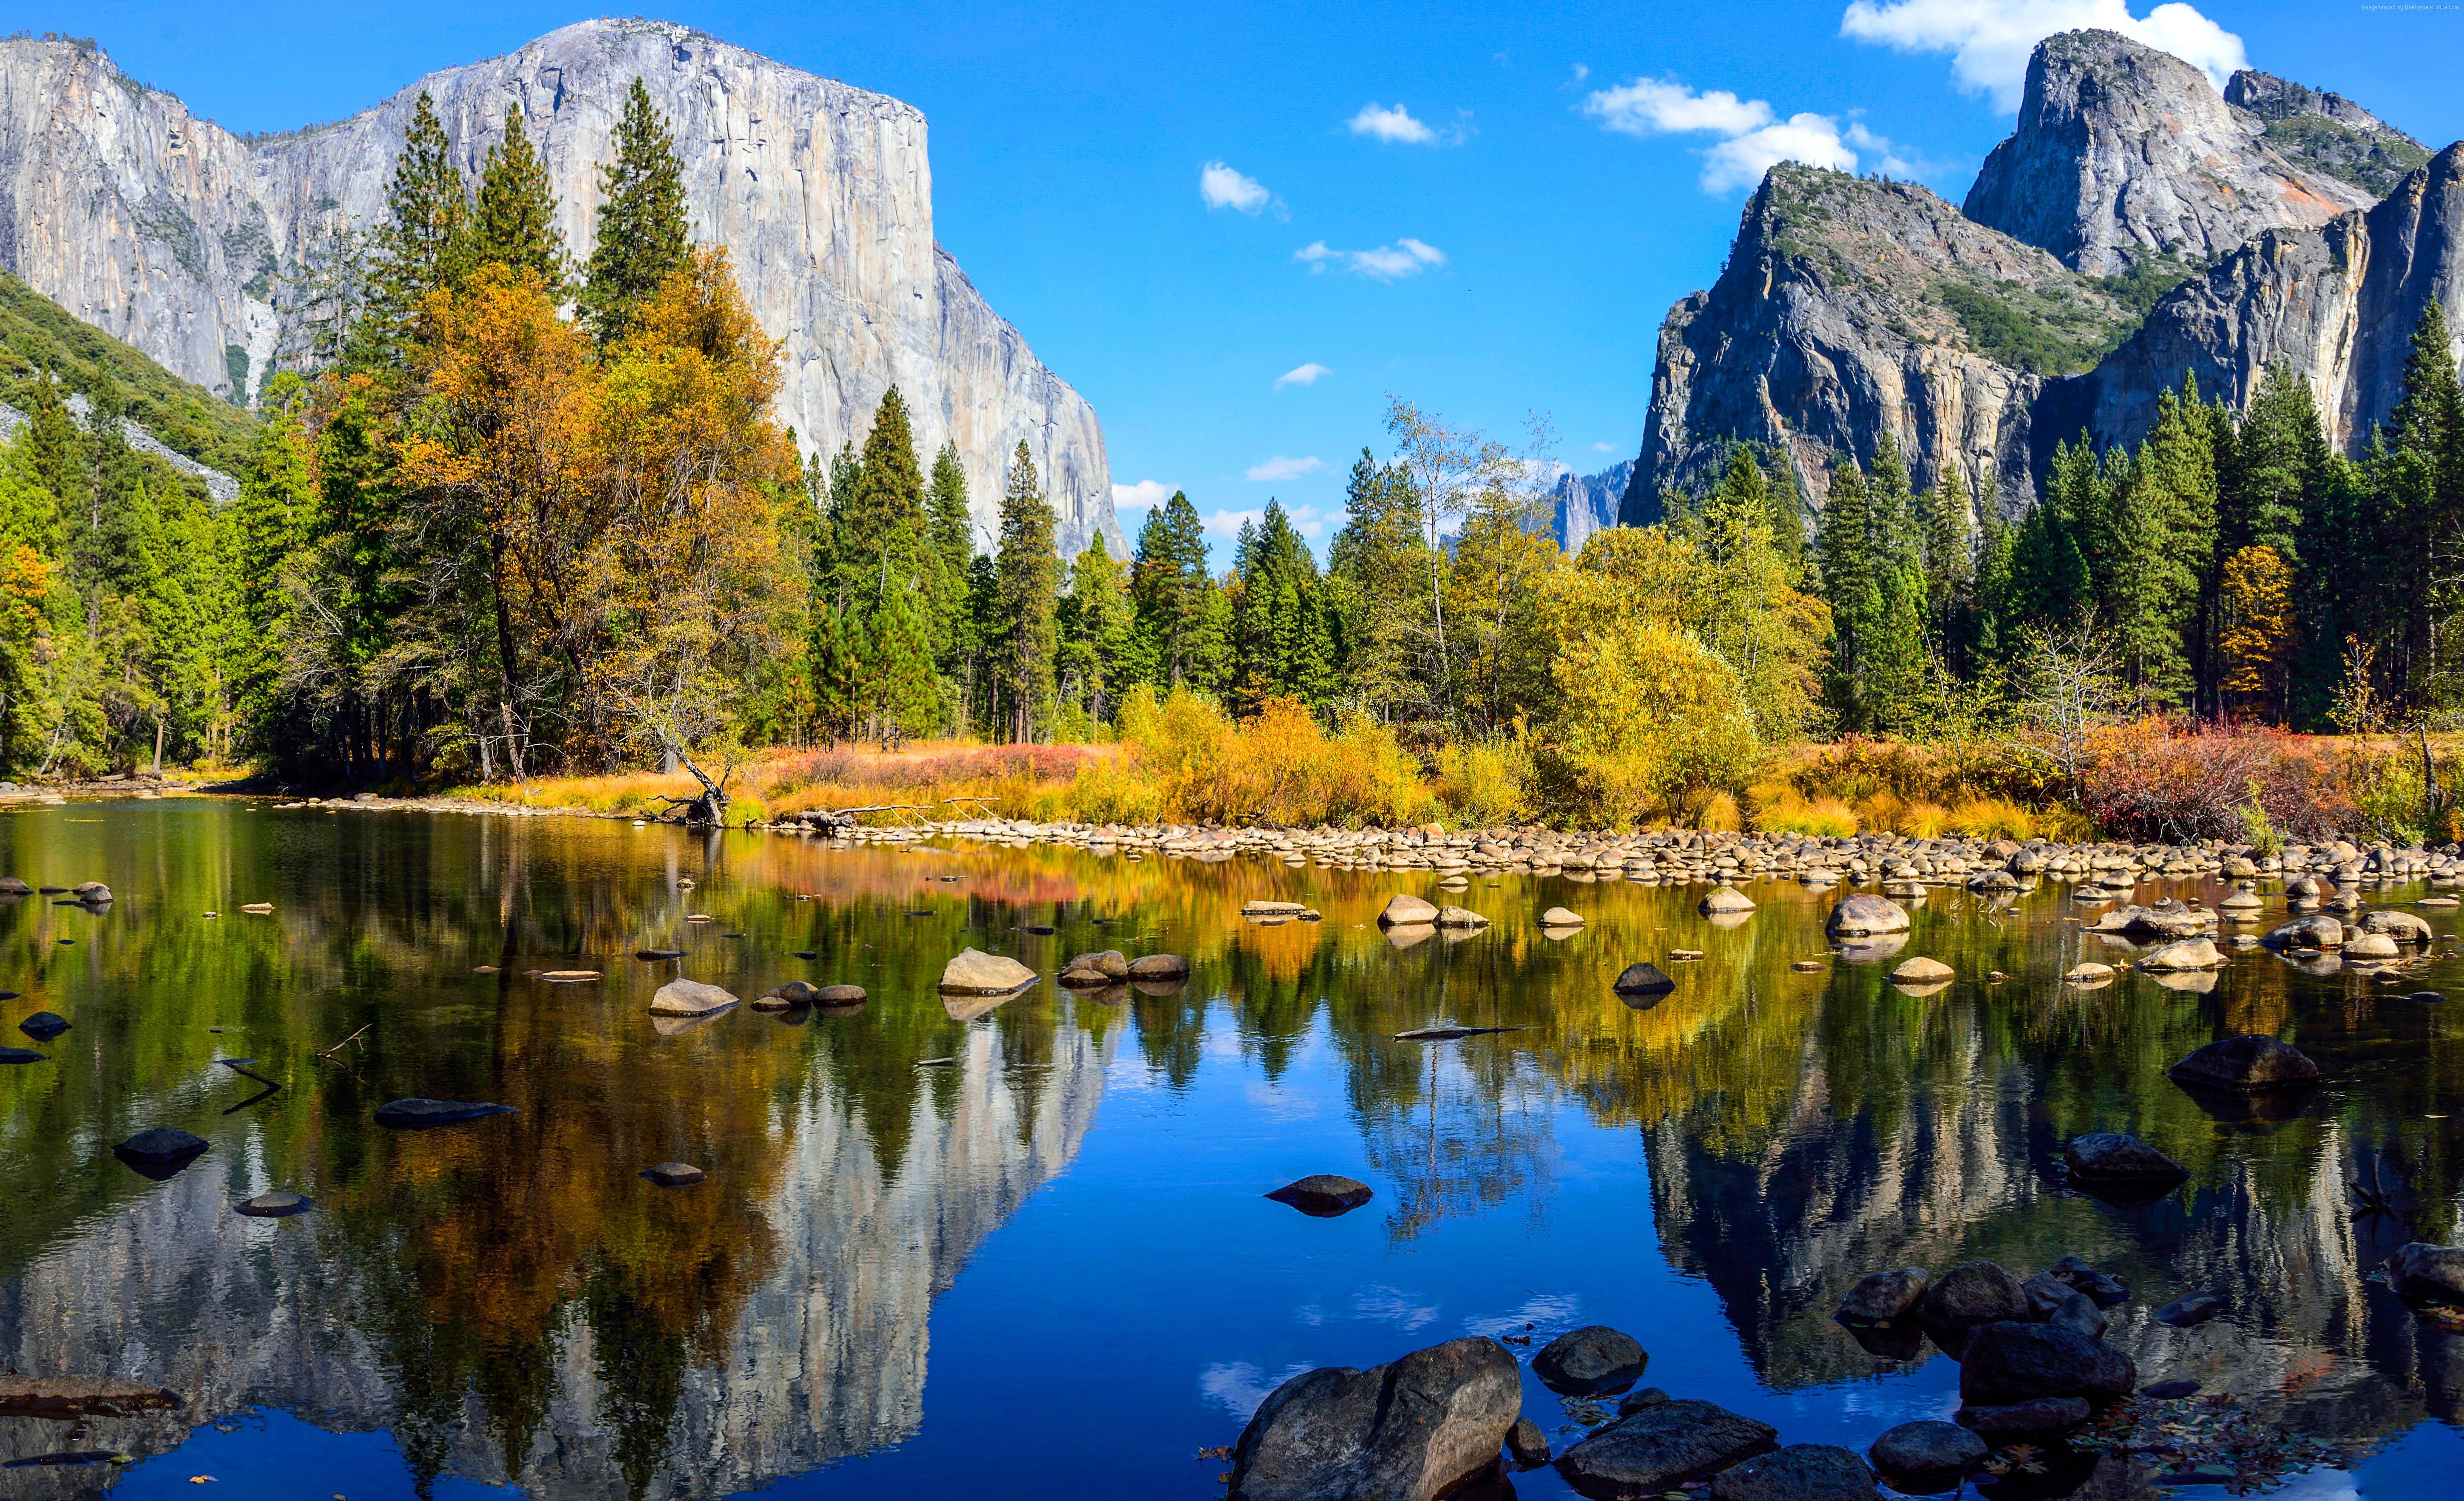  5k wallpapers El Capitan forest OSX apple mountains lake 5796x3531